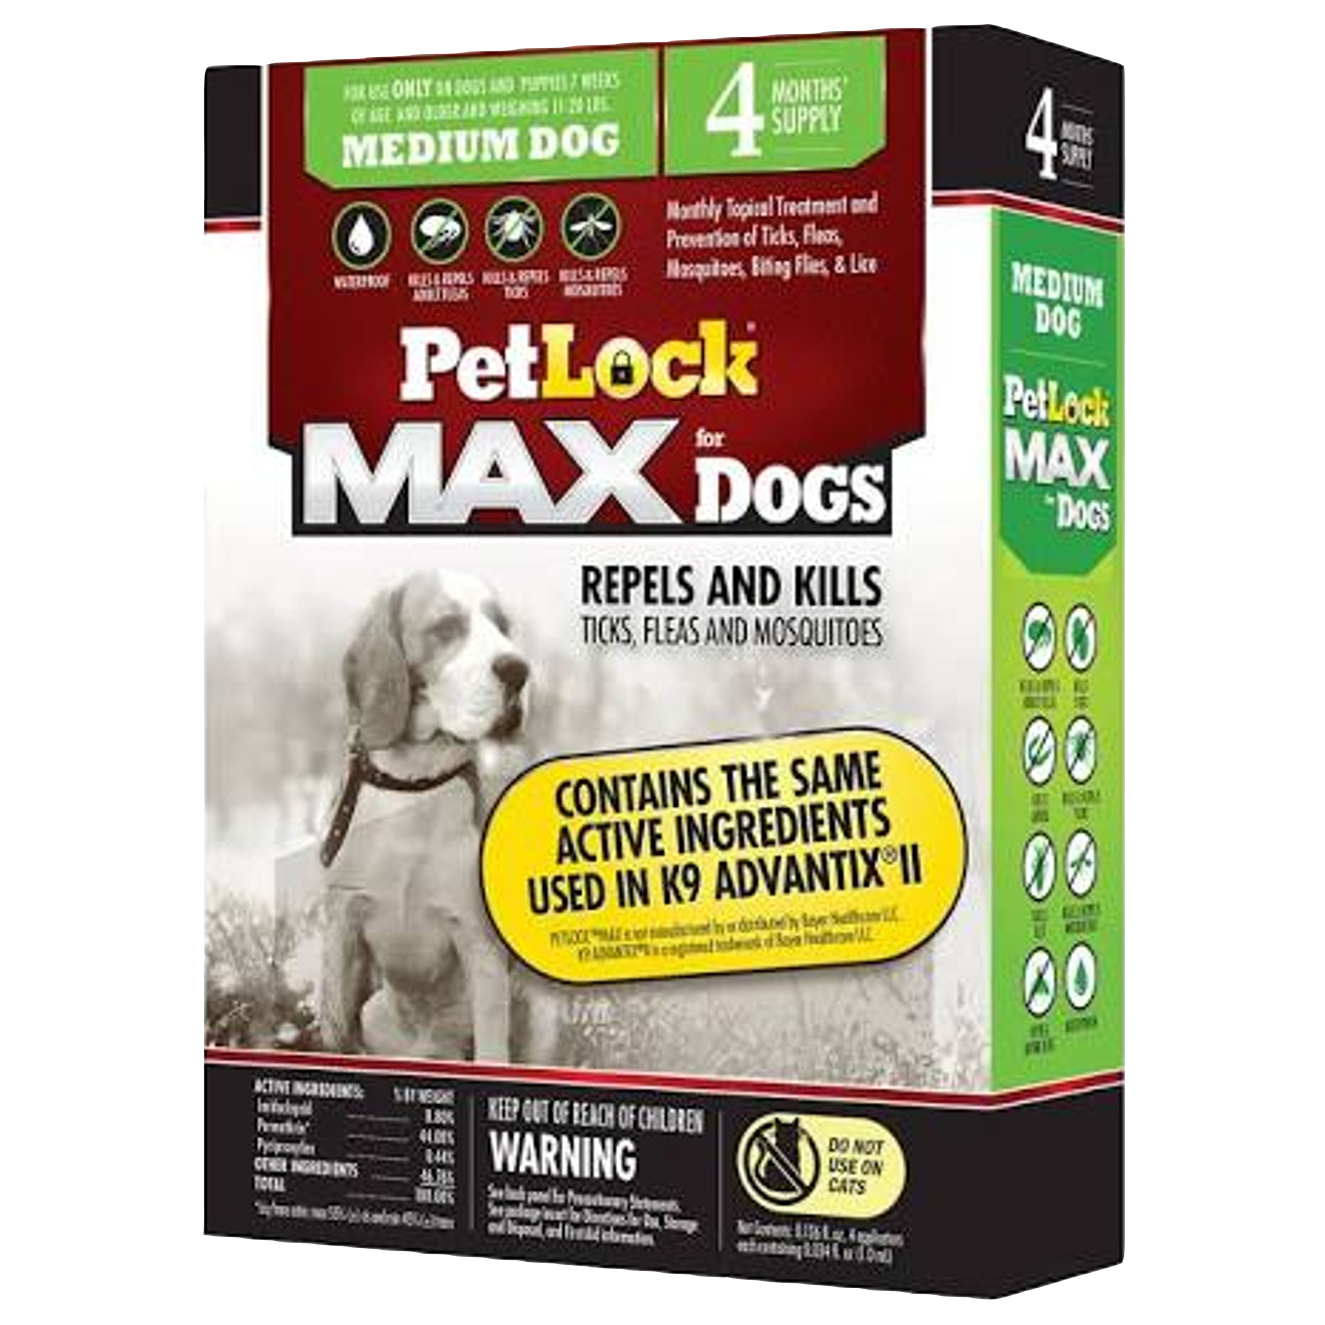 PetLock Max Flea and Tick for Dogs 11 - 20lb - 4 Month Supply